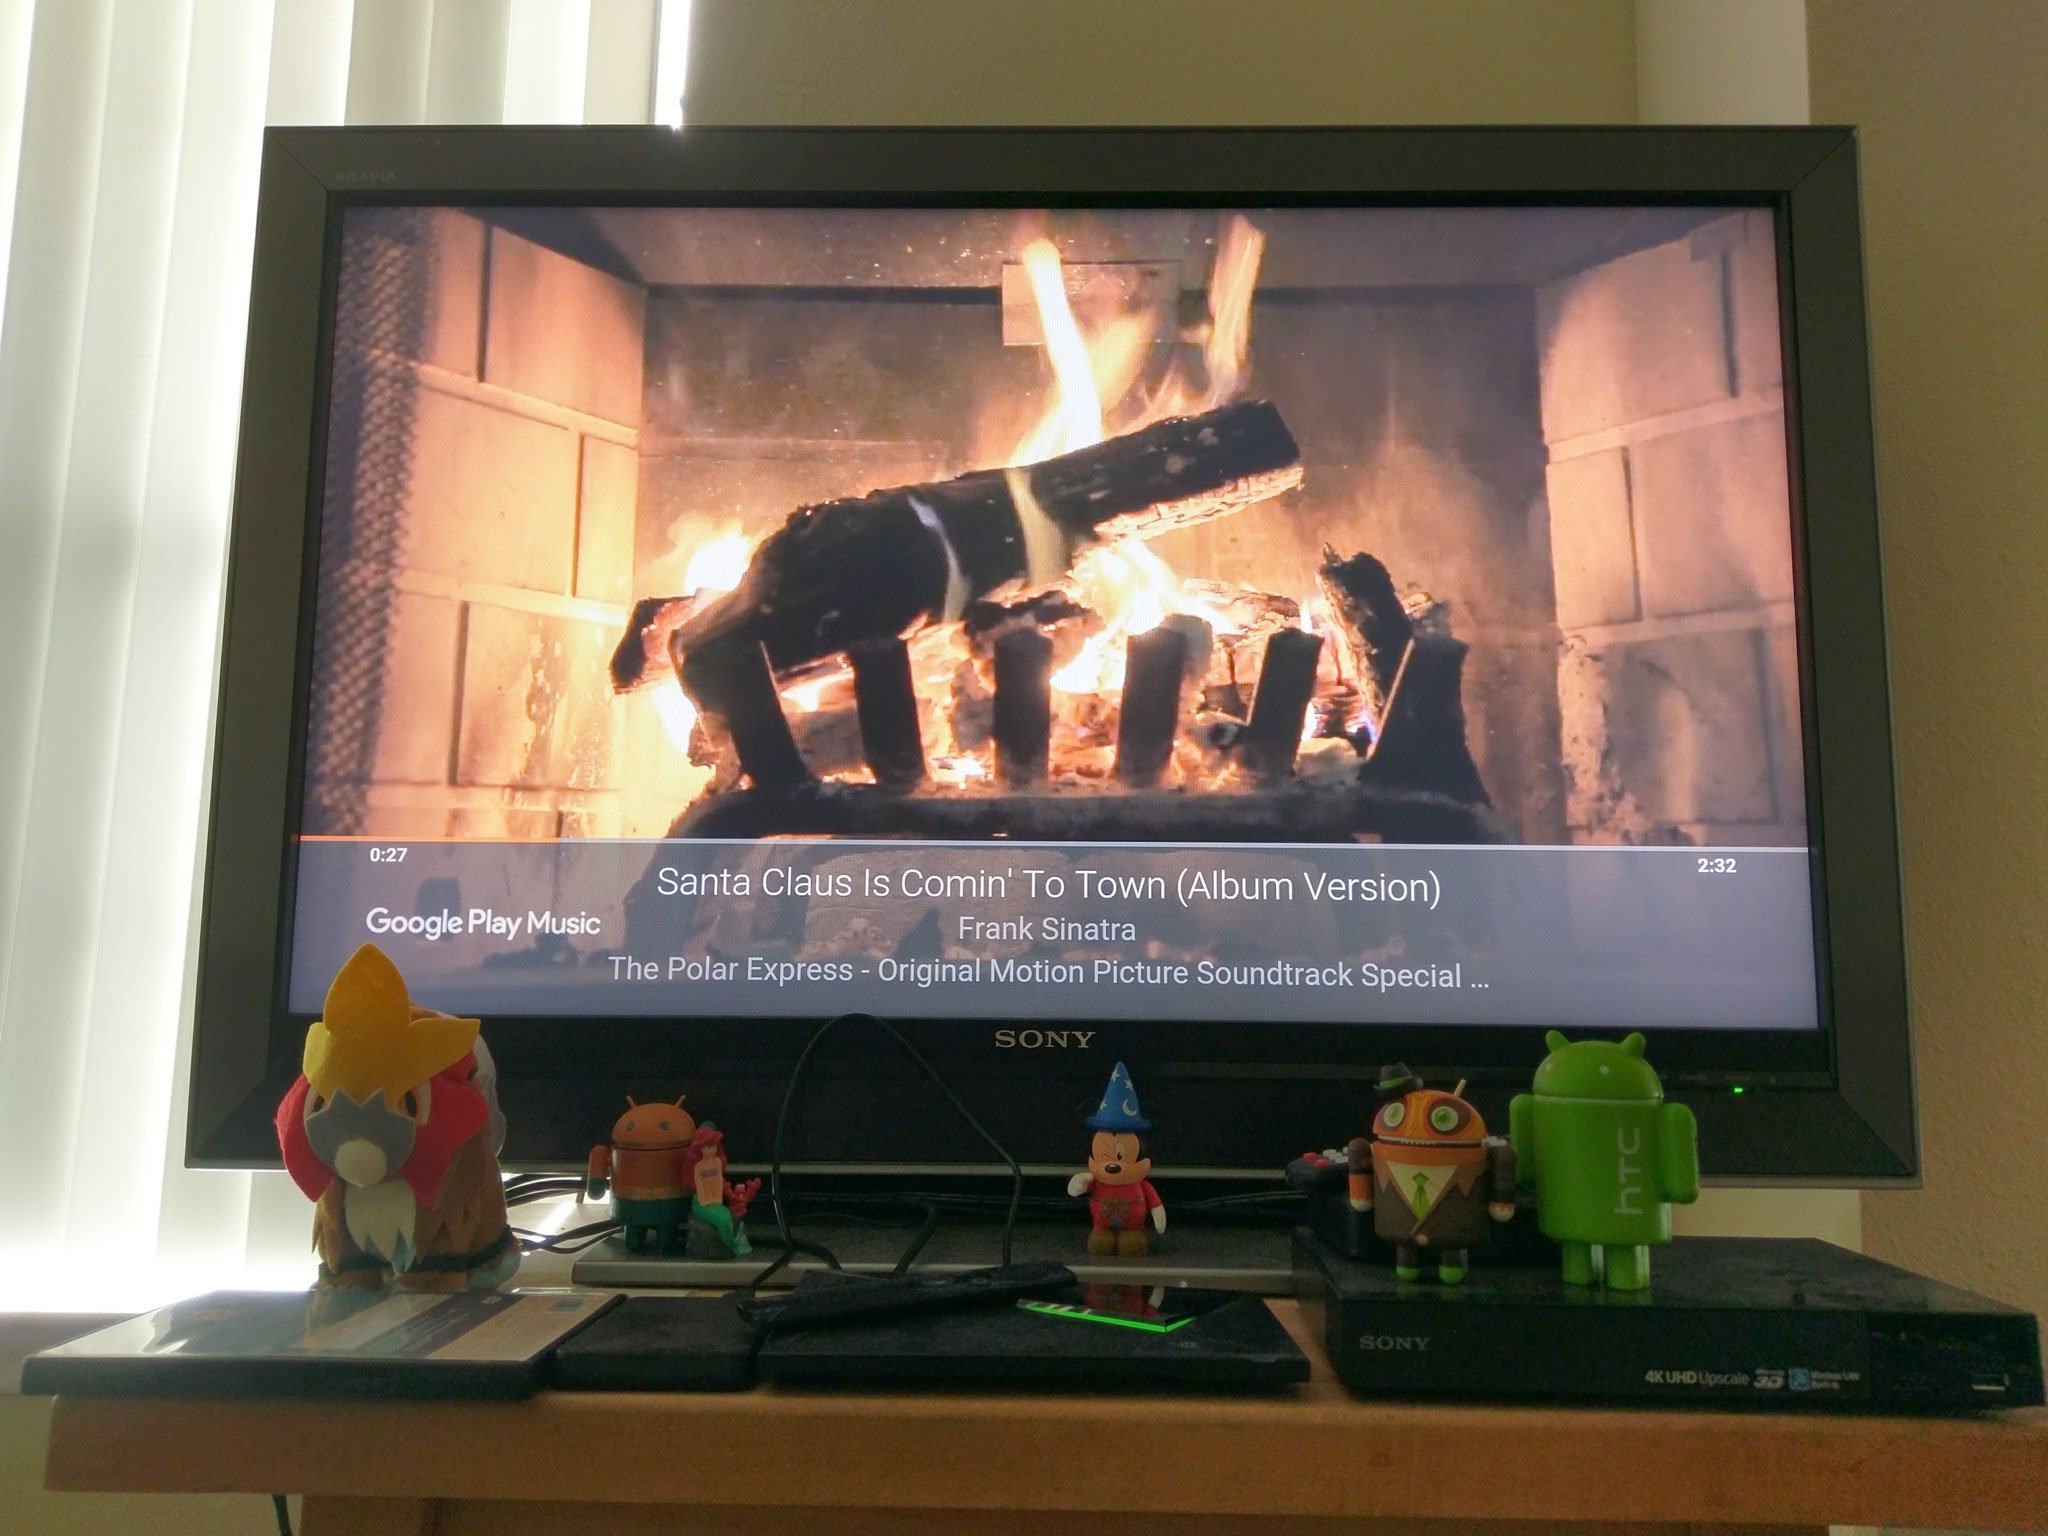 Tis the season for holiday tunes and mind-numbing yule log DVDs